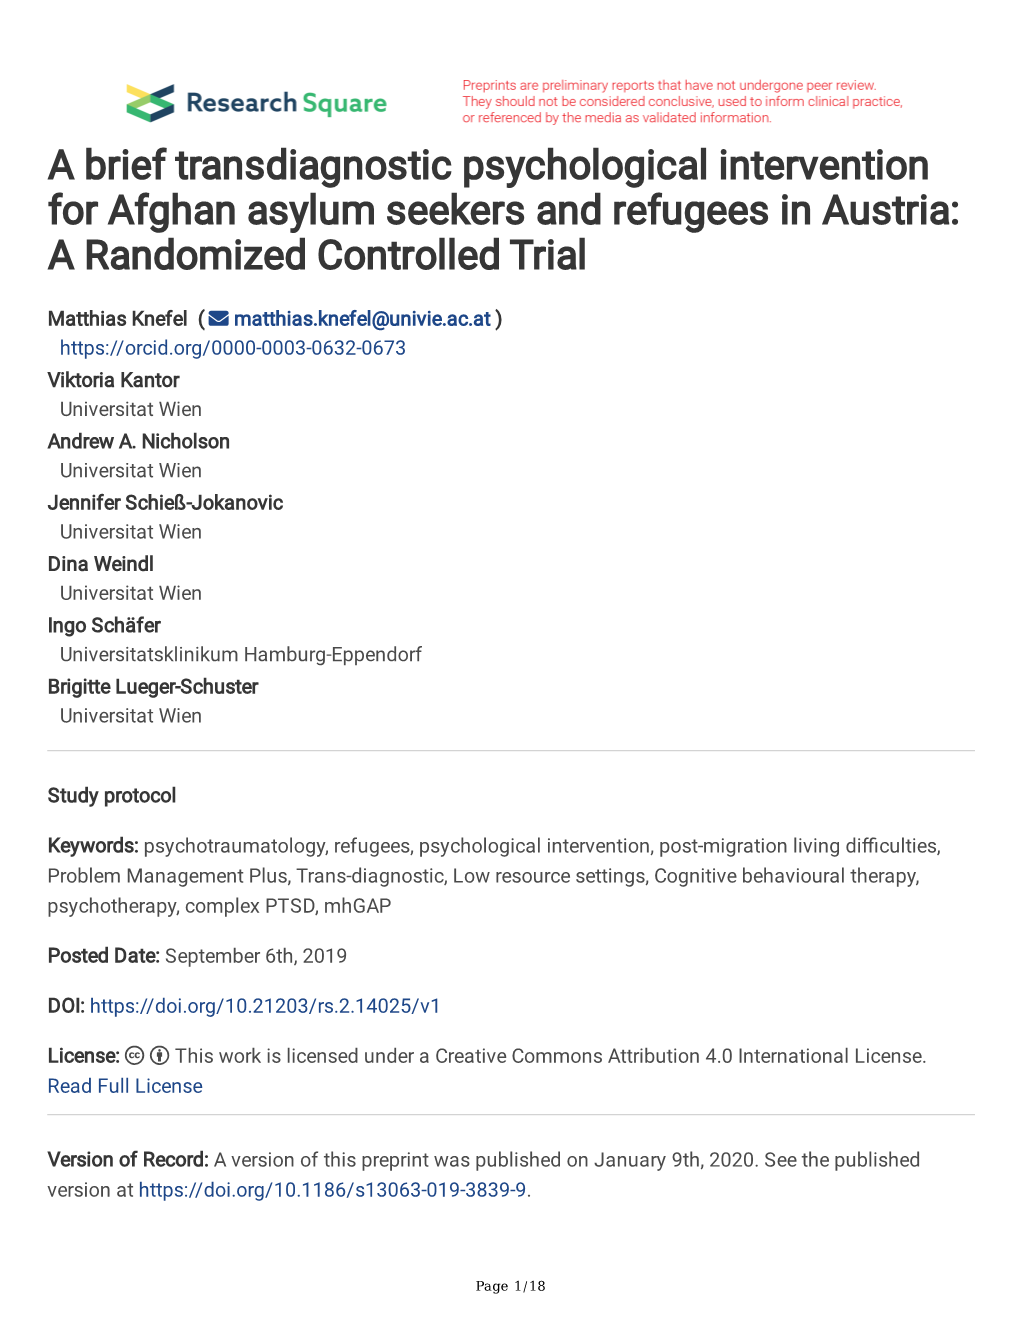 A Brief Transdiagnostic Psychological Intervention for Afghan Asylum Seekers and Refugees in Austria: a Randomized Controlled Trial